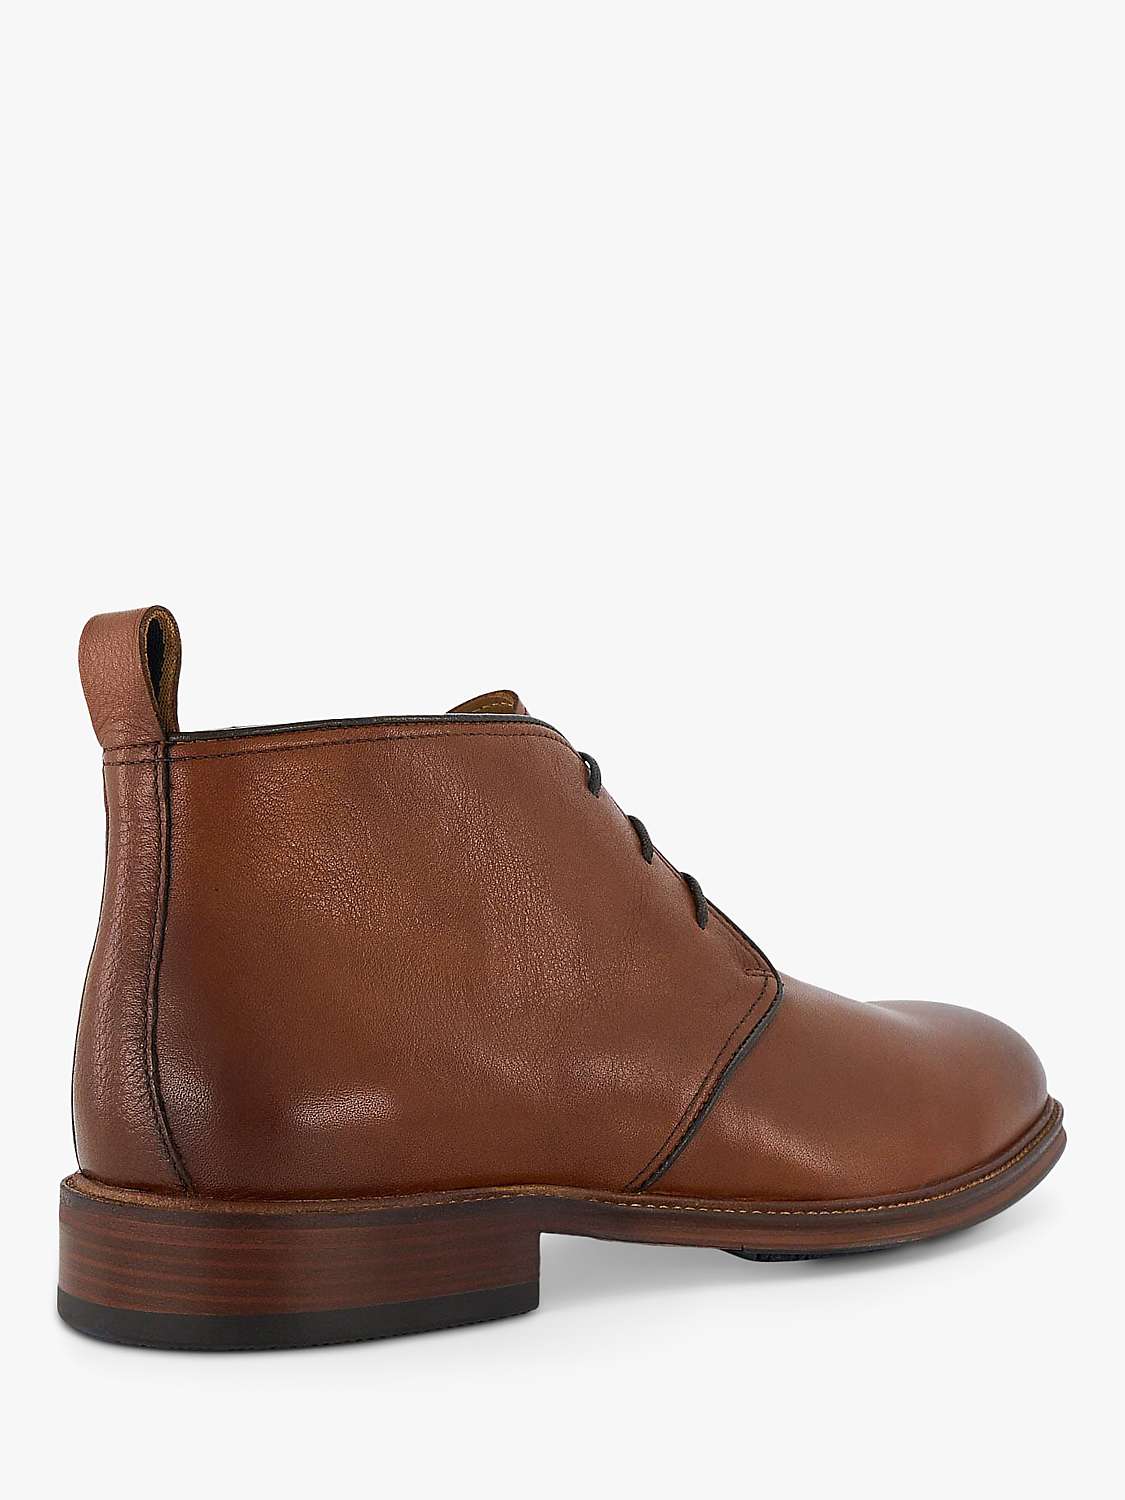 Dune Coopper Leather Chukka Boots, Tan-leather at John Lewis & Partners